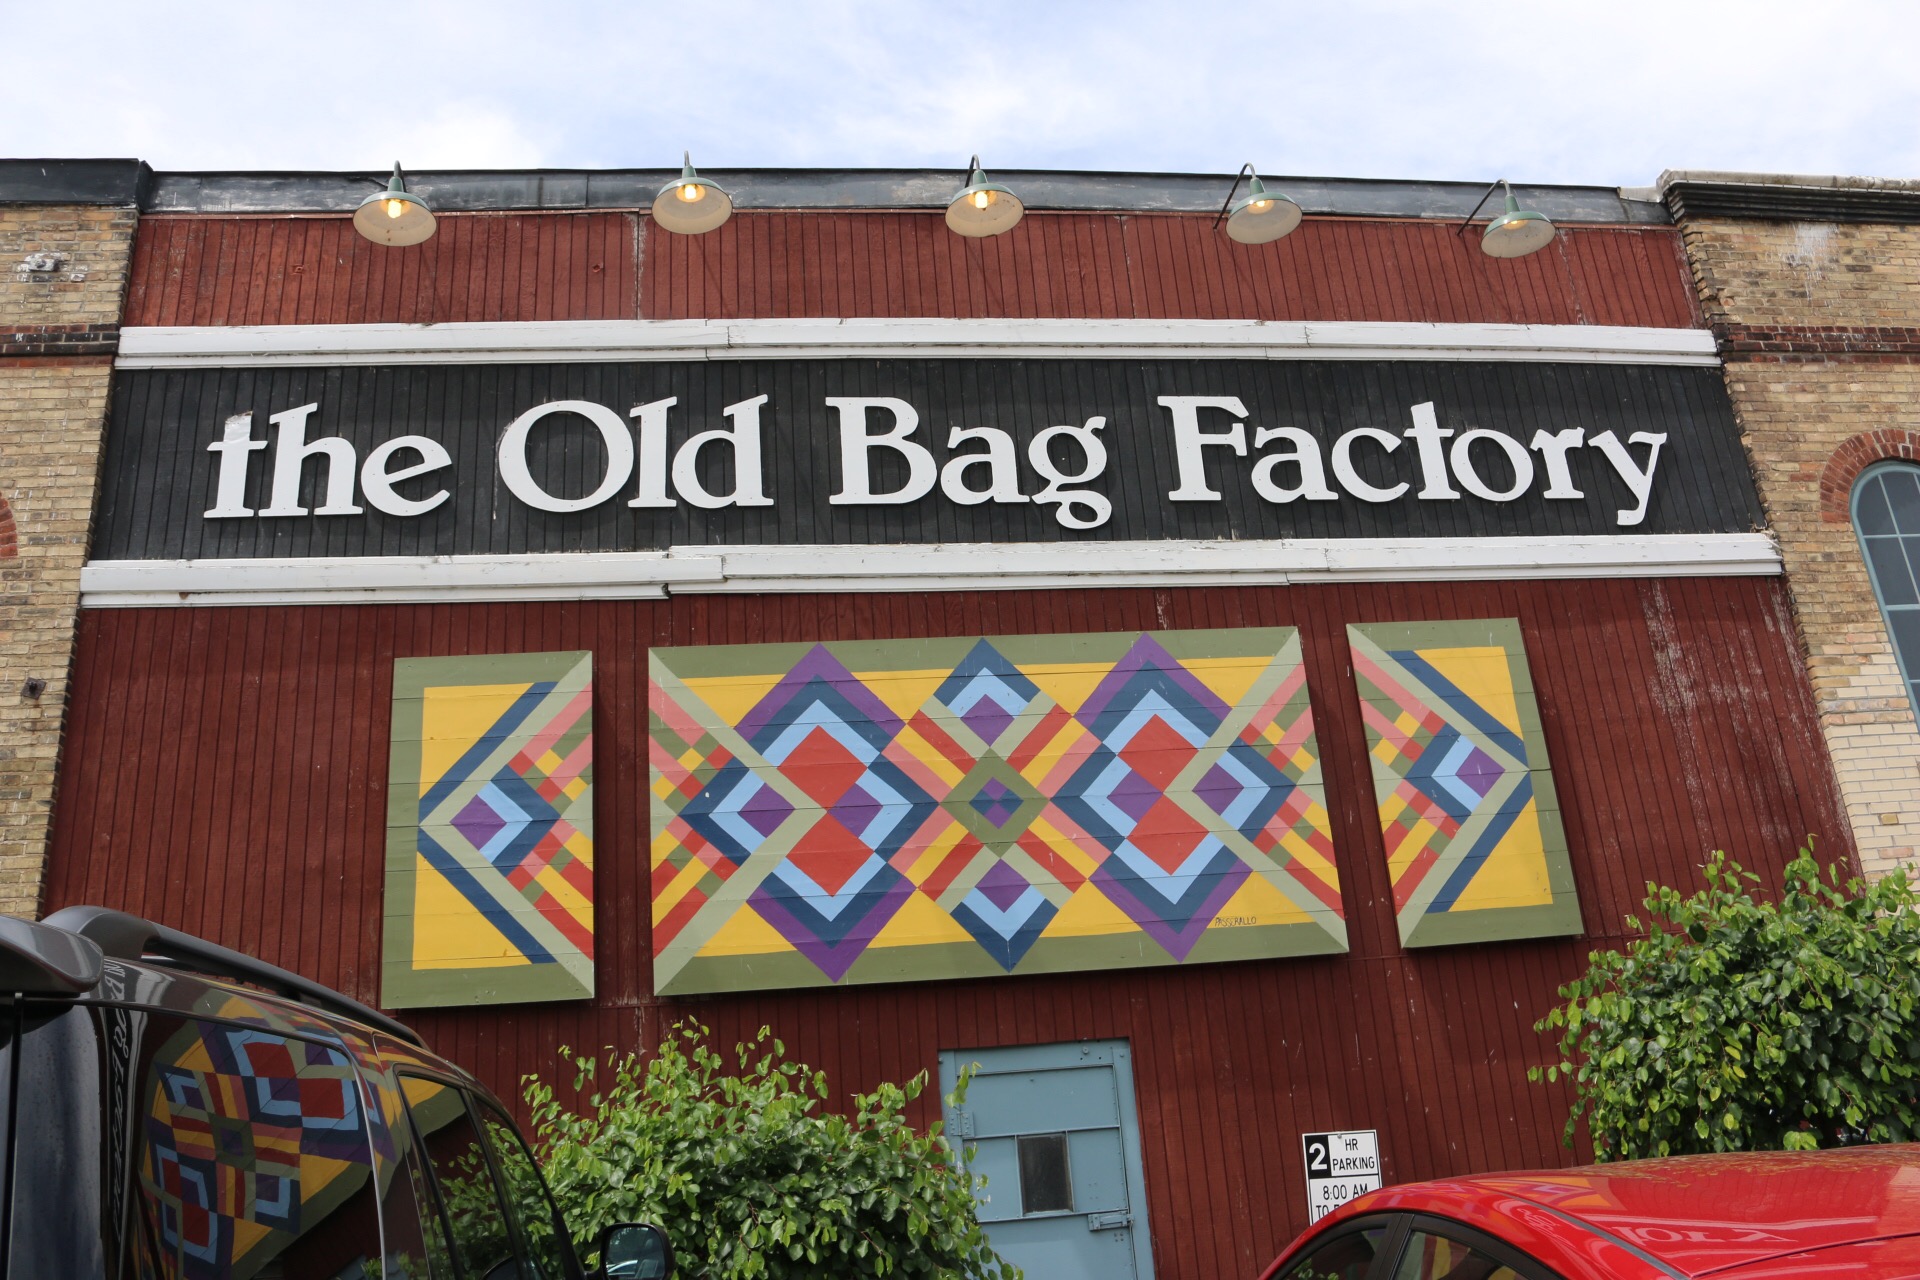 The Old Bag Factory